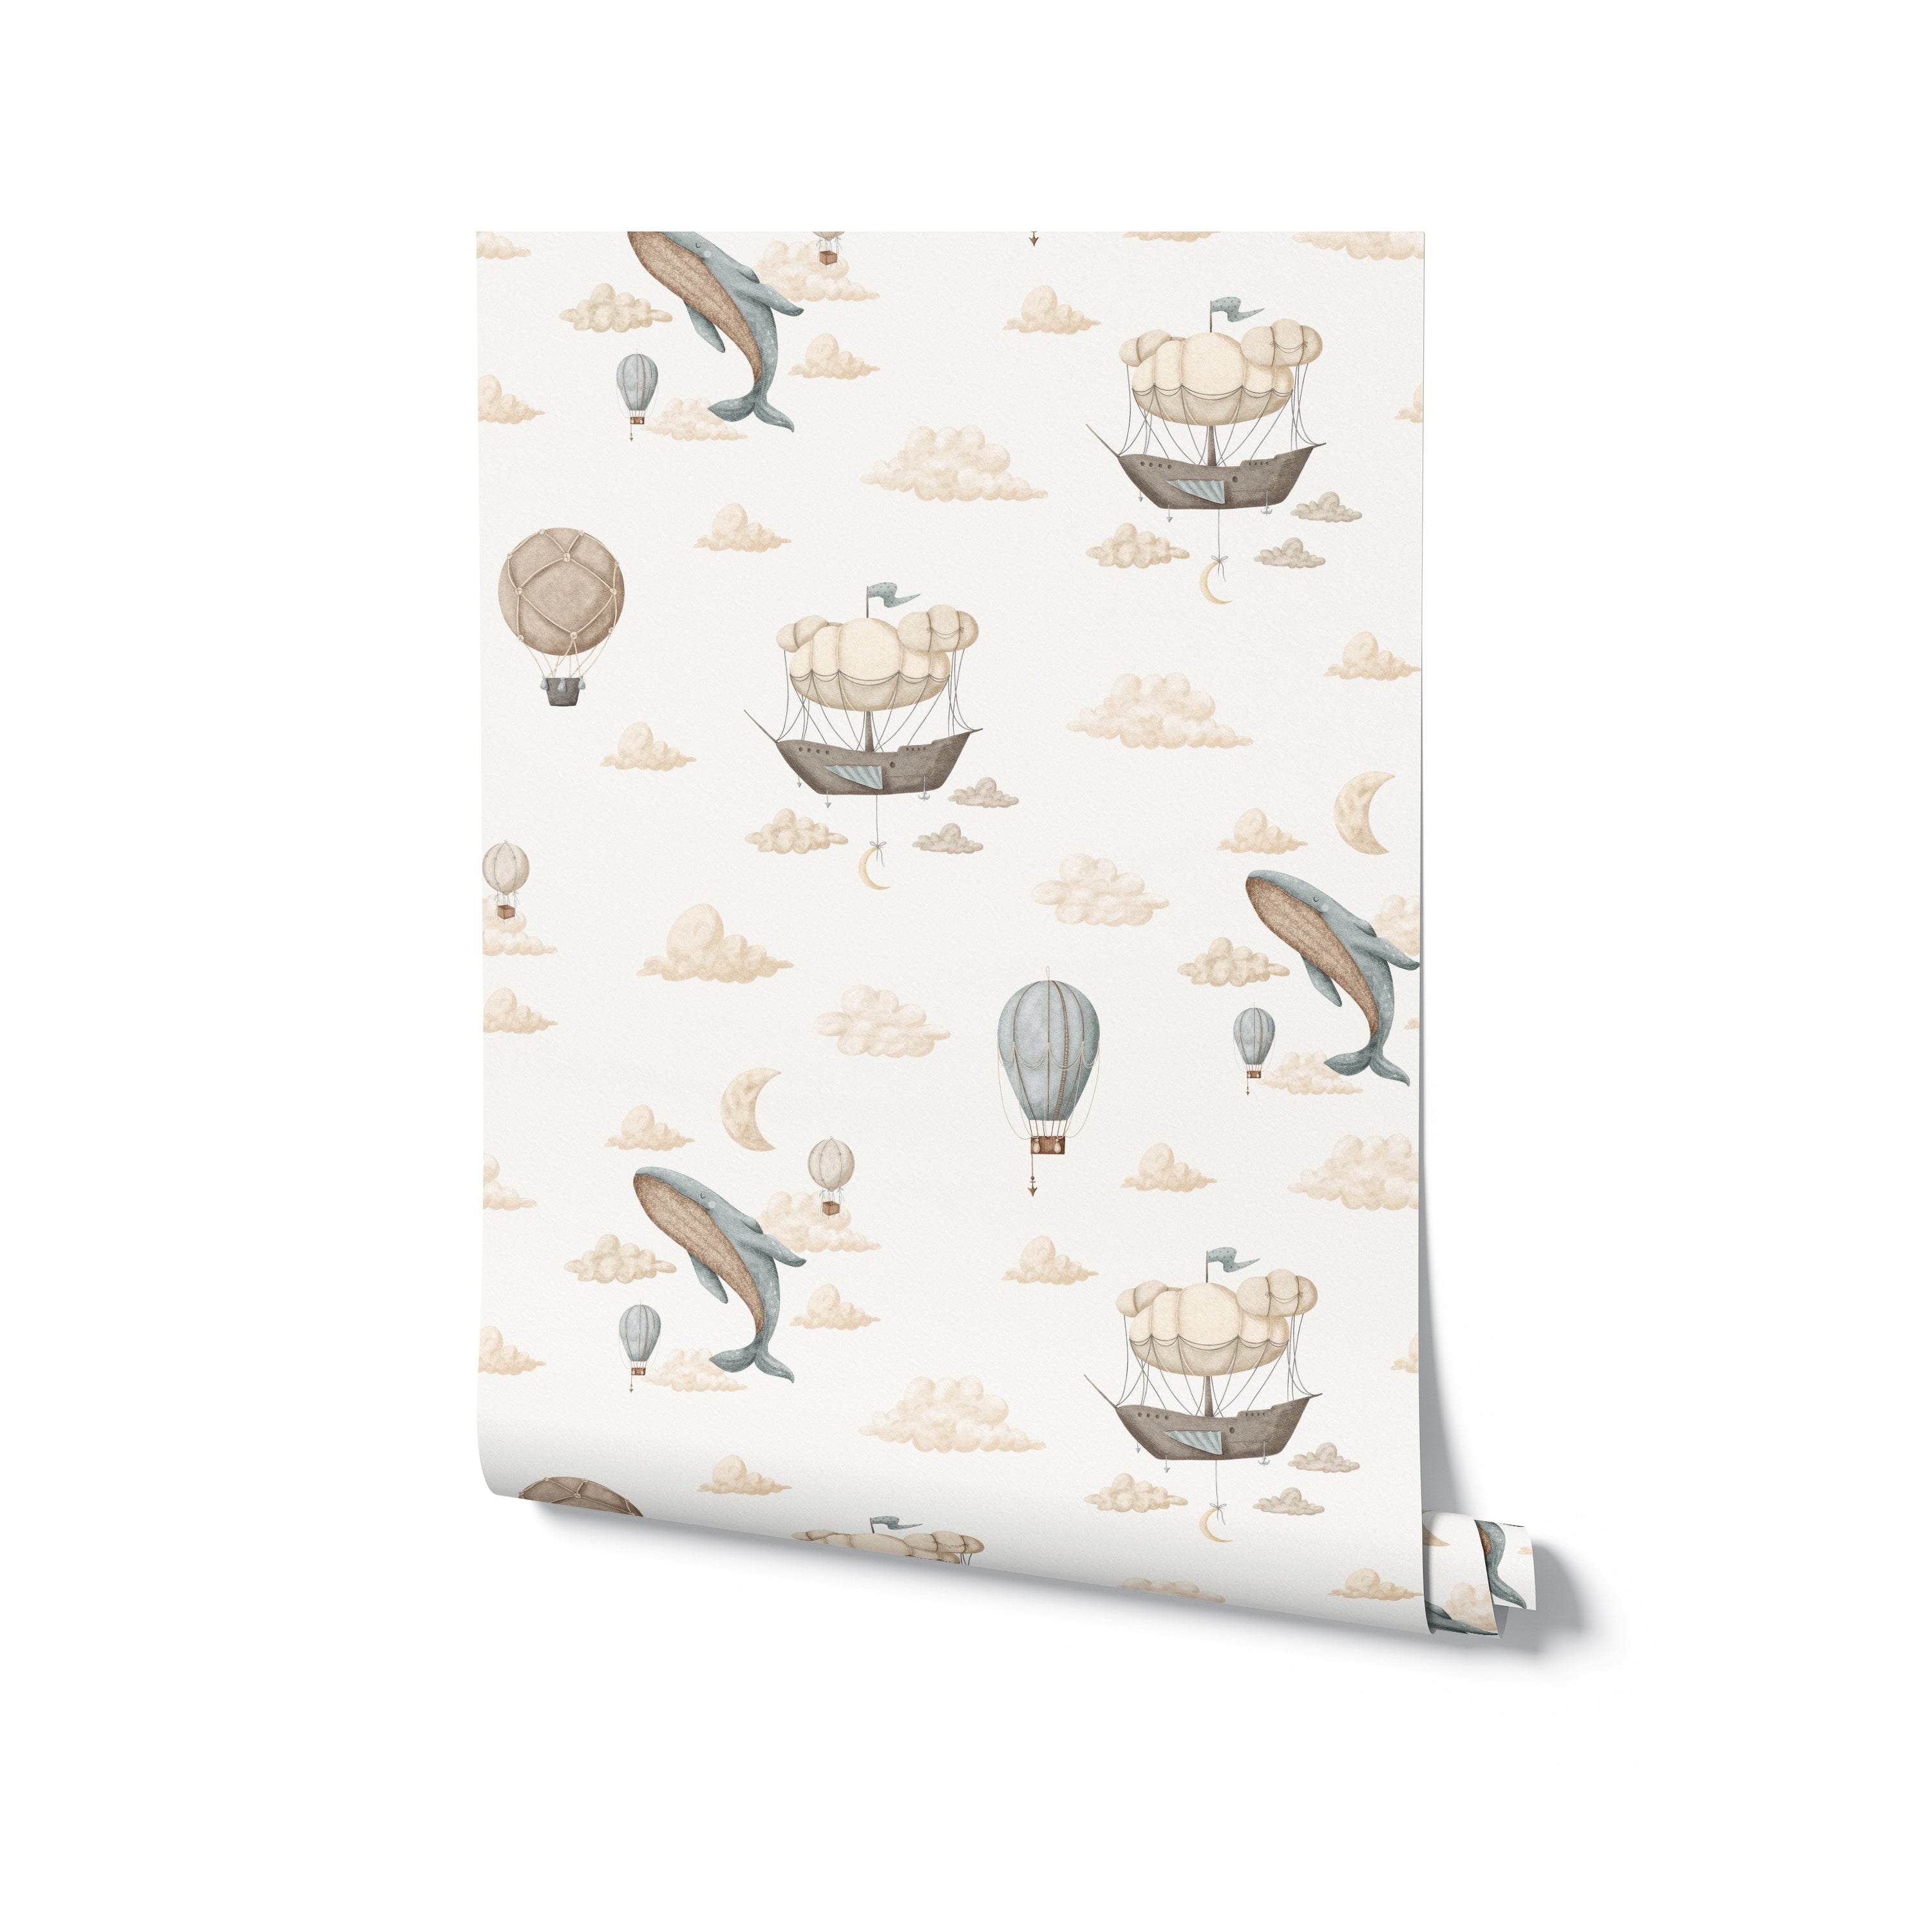 A rolled panel of Cloudy Voyages Wallpaper displaying a whimsical pattern of airships, hot air balloons, and clouds, perfect for inspiring dreams in any nursery.